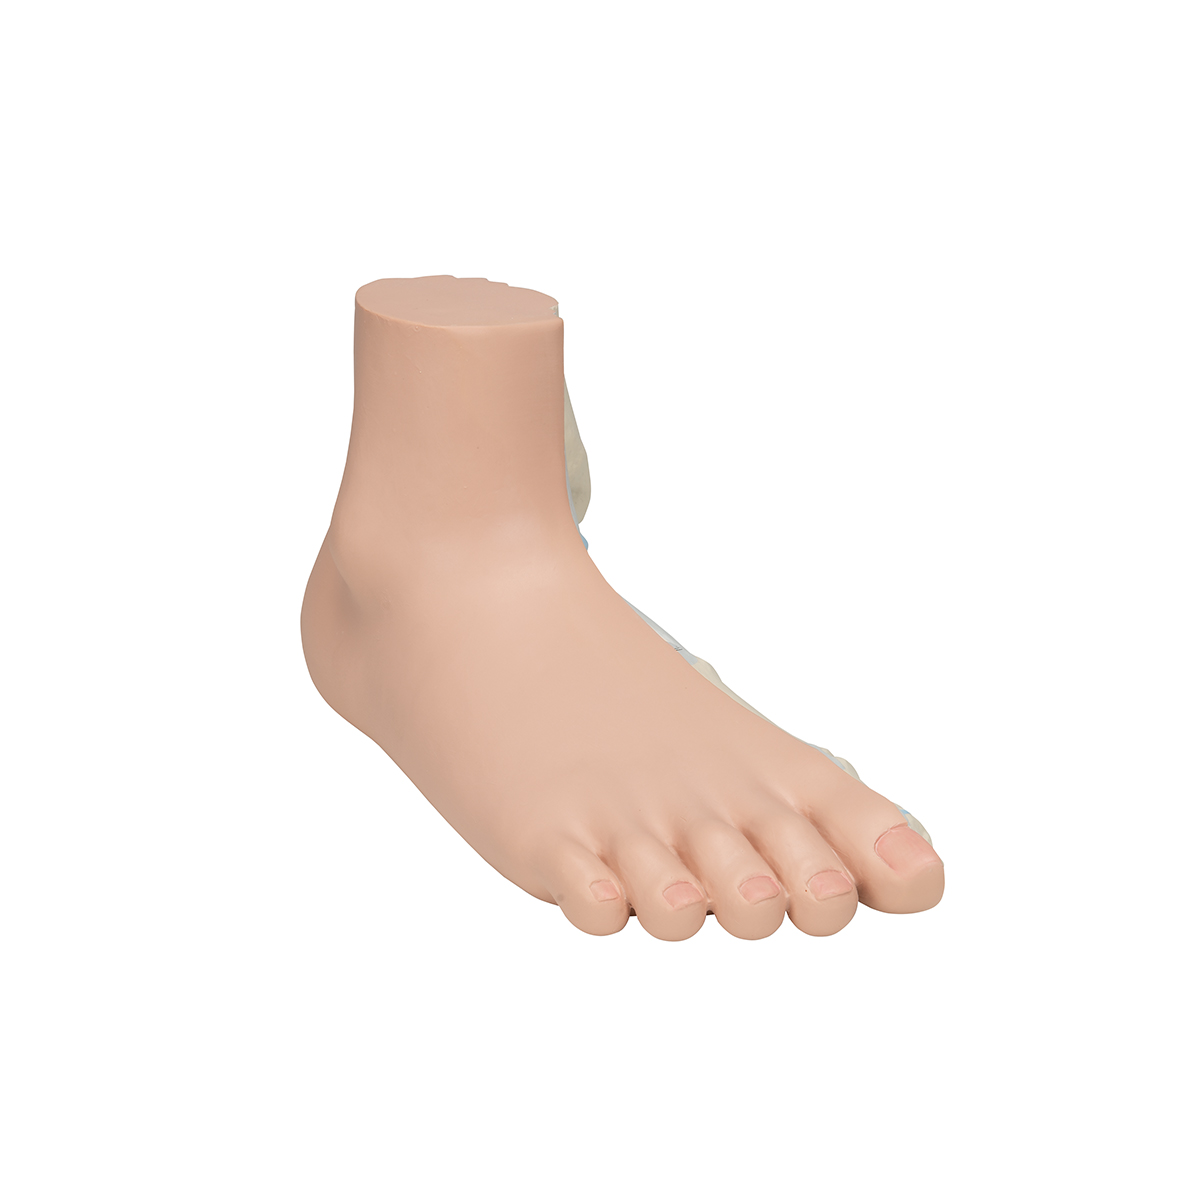 Arched Foot and Normal Foot Model Details about    Life Size Foot Model Depicts Flat Foot 